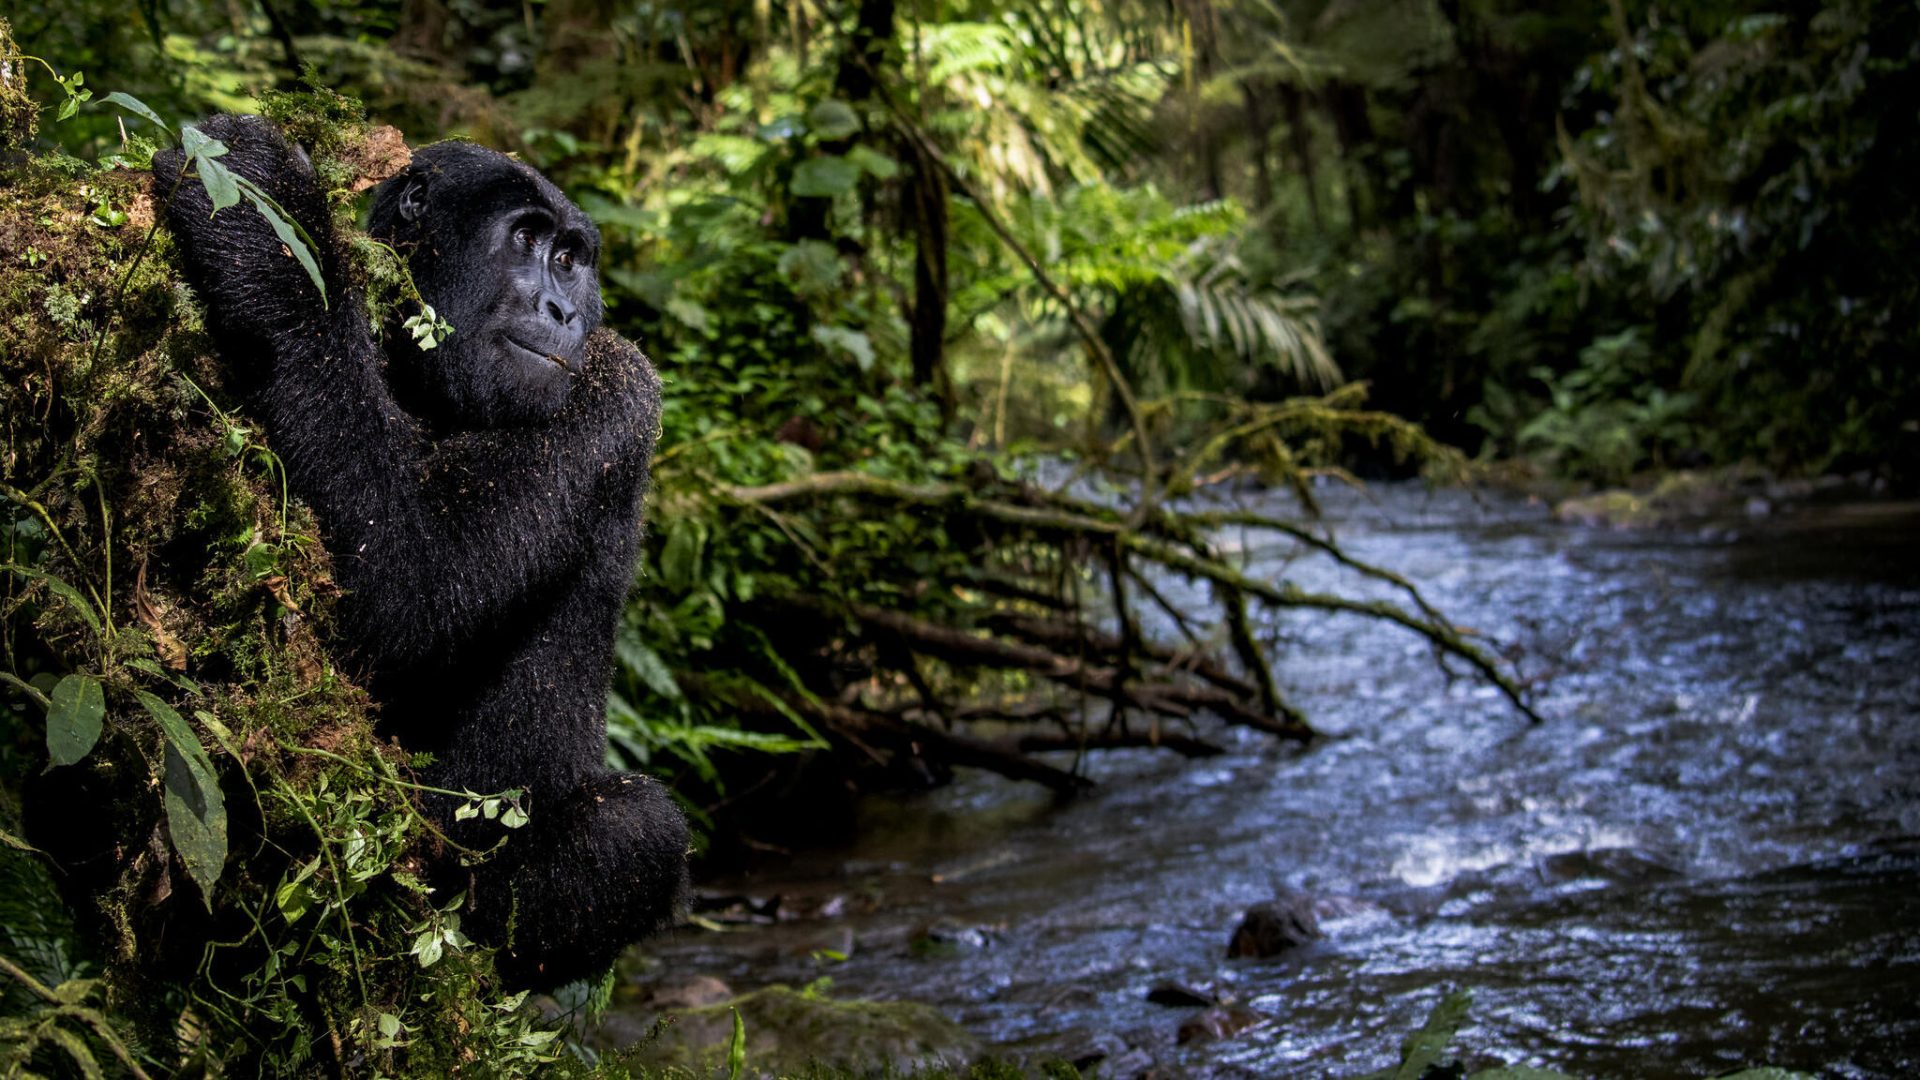 Gorilla by the water / Kathleen Ricker / 2021 environmental photography competition